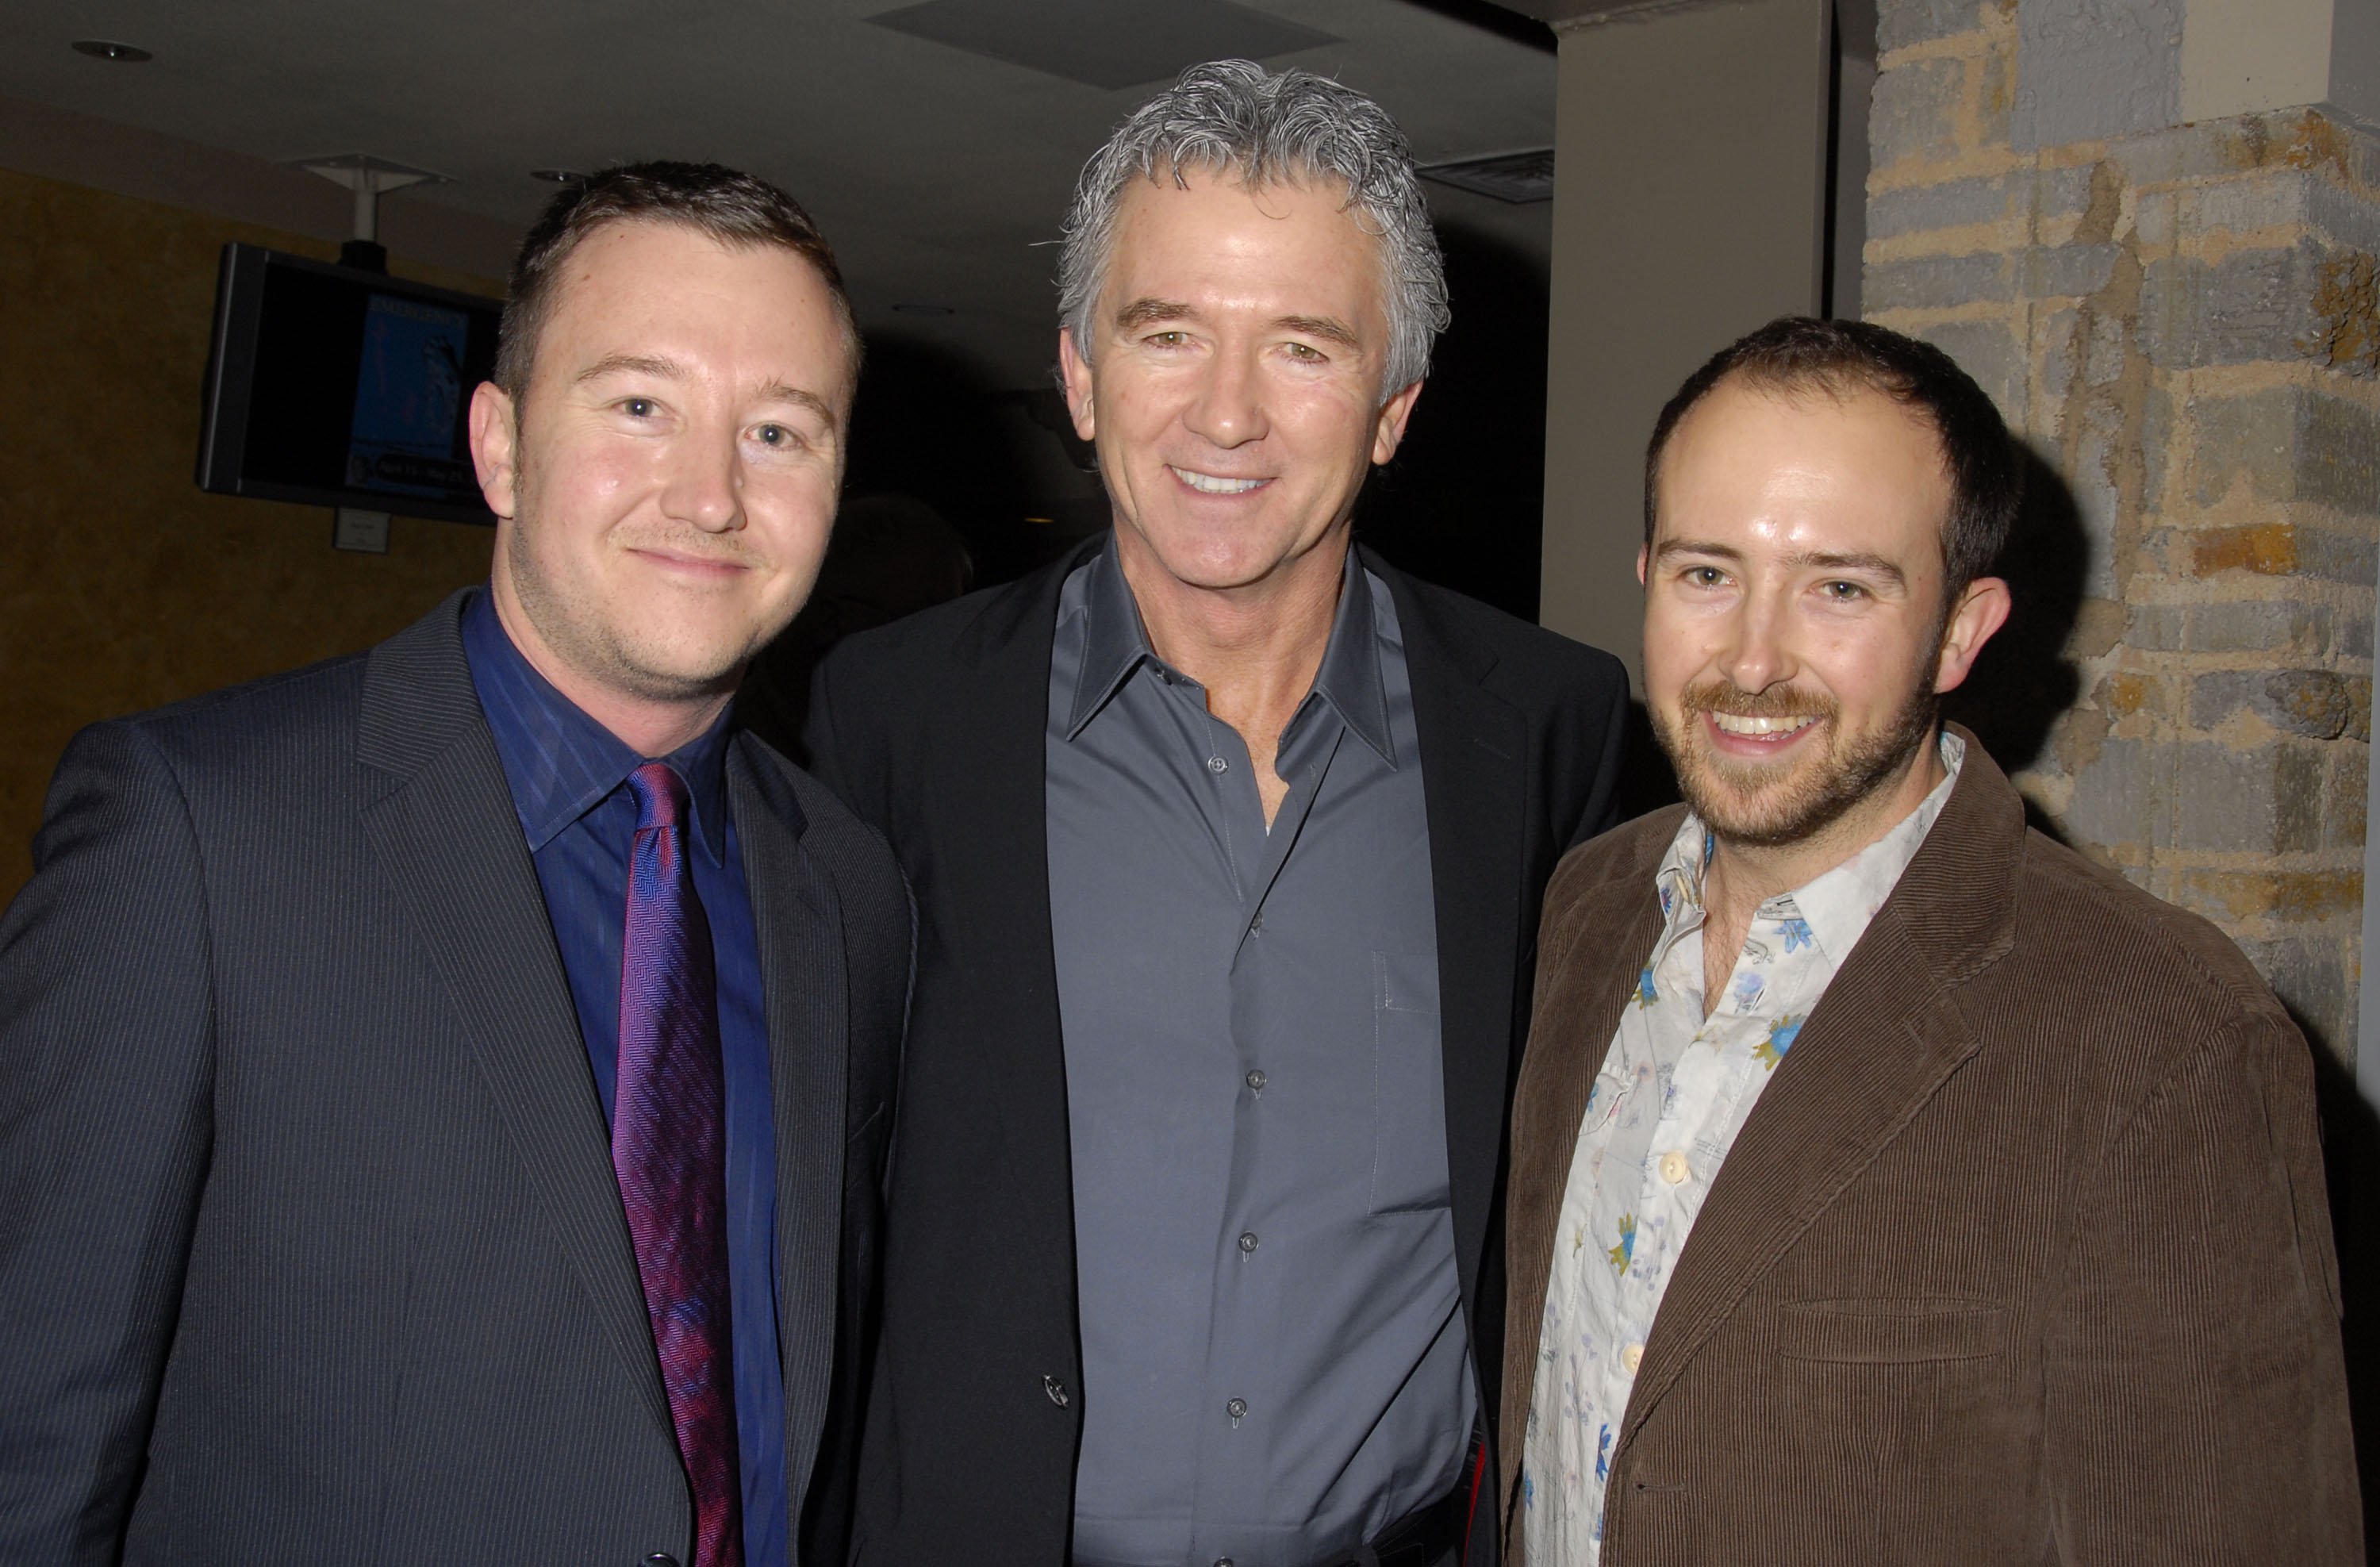 Patrick Duffy, Padriac Duffy and Conor Duffy at the opening night of Joan Rivers: A Work in Progress By A Life in Progress at the Geffen Playhouse on February 13, 2008 in Los Angeles, California | Source: Getty Images